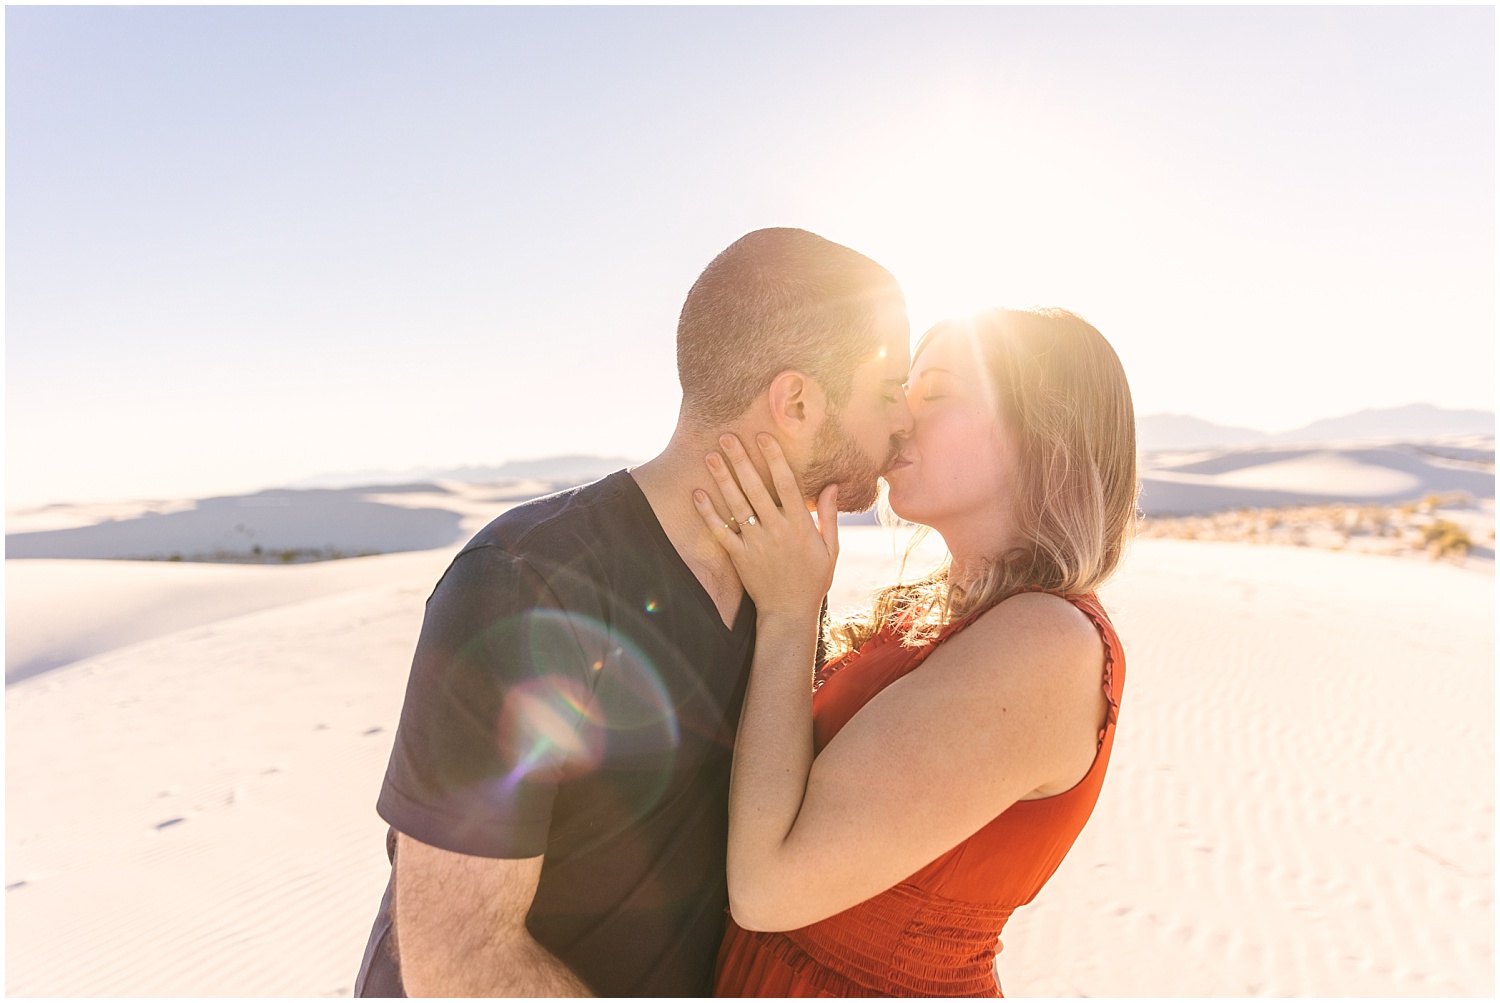 Golden hour couples portraits at White Sands National Park in New Mexico